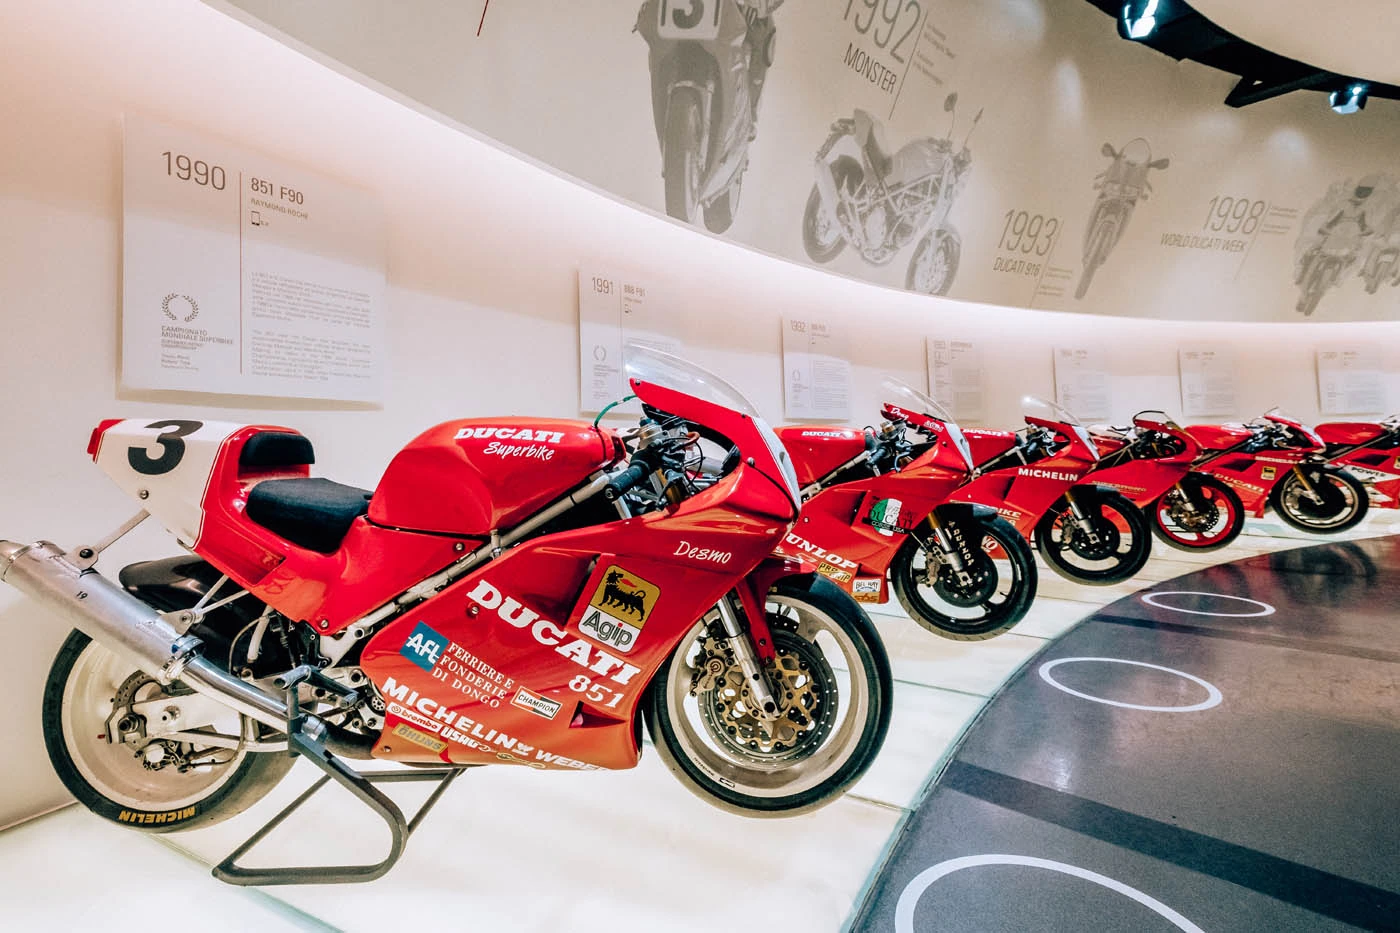 Things to Do in Bologna - Ducati Museum - Ducati 851 F90